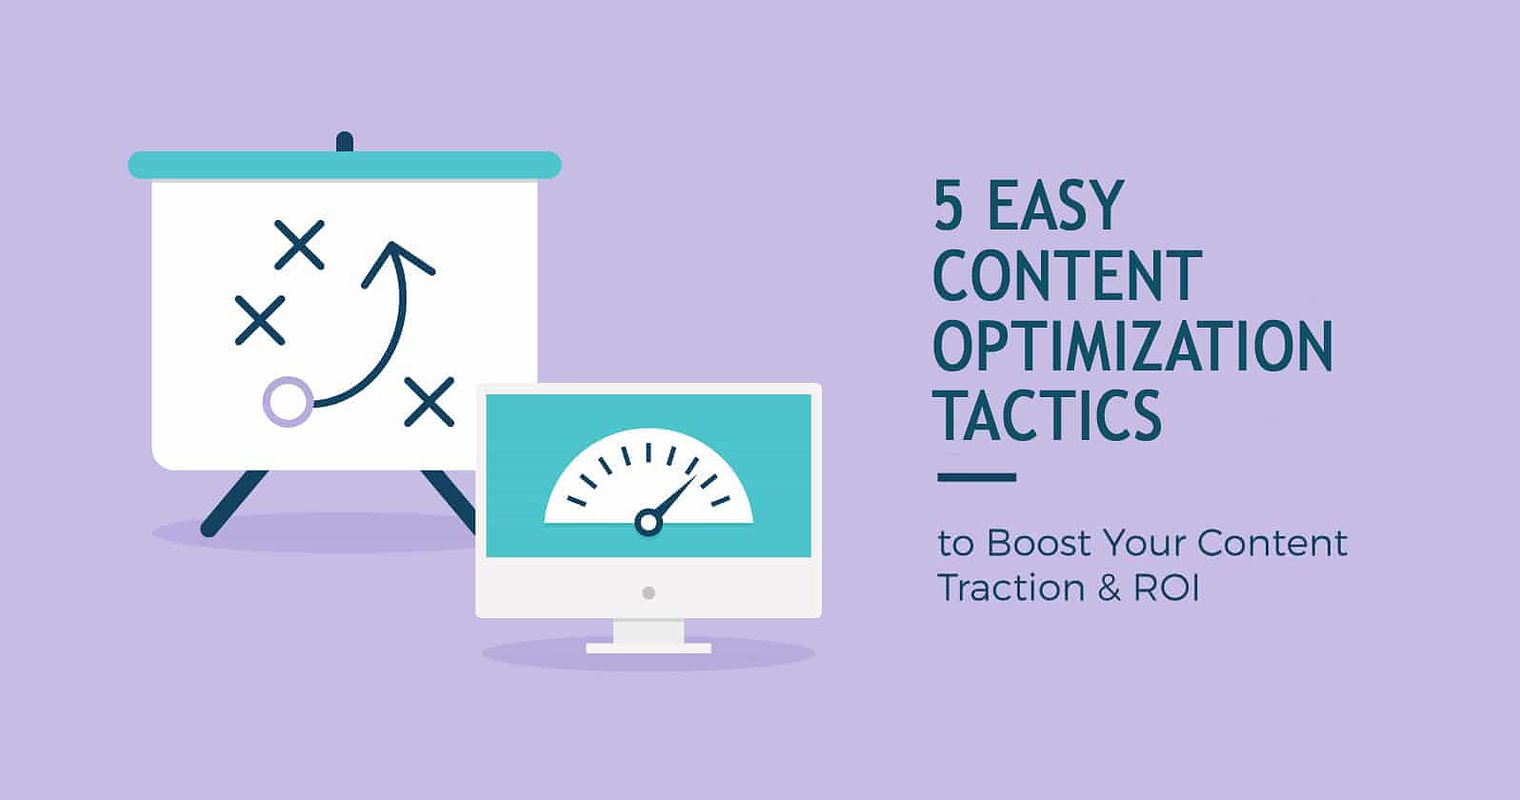 5 Easy Content Optimization Tactics to Boost Your Traction & ROI